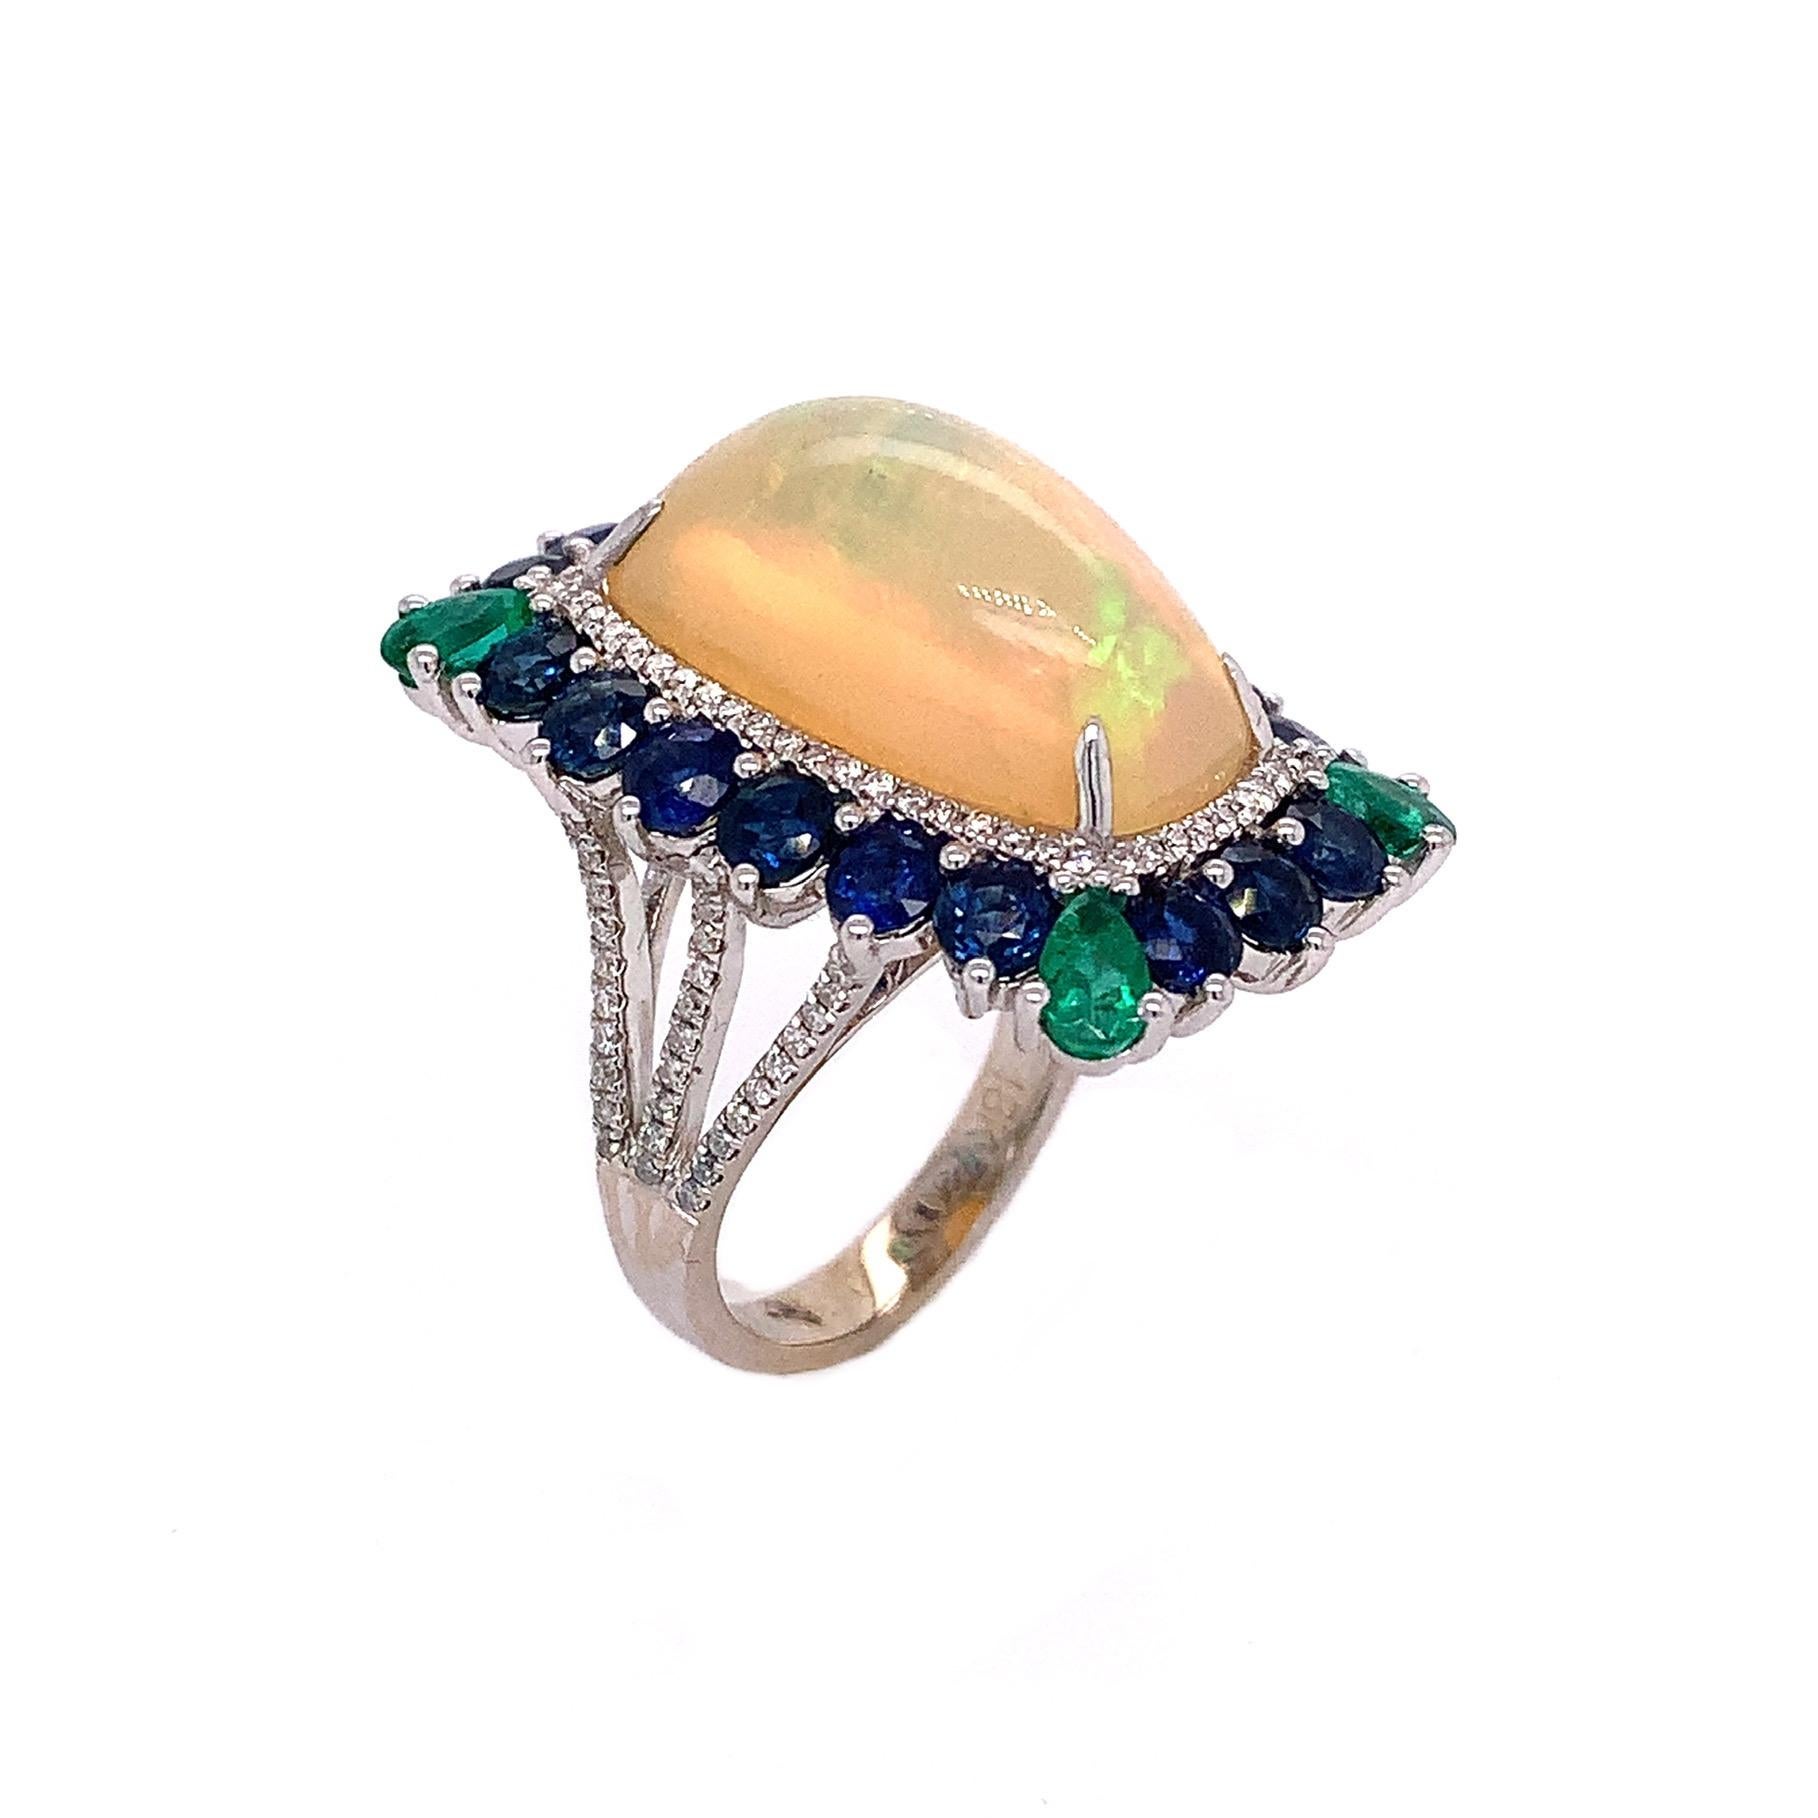 This beautiful opal ring features an Ethiopian opal with emerald and blue sapphire accents set in 18K white gold. 